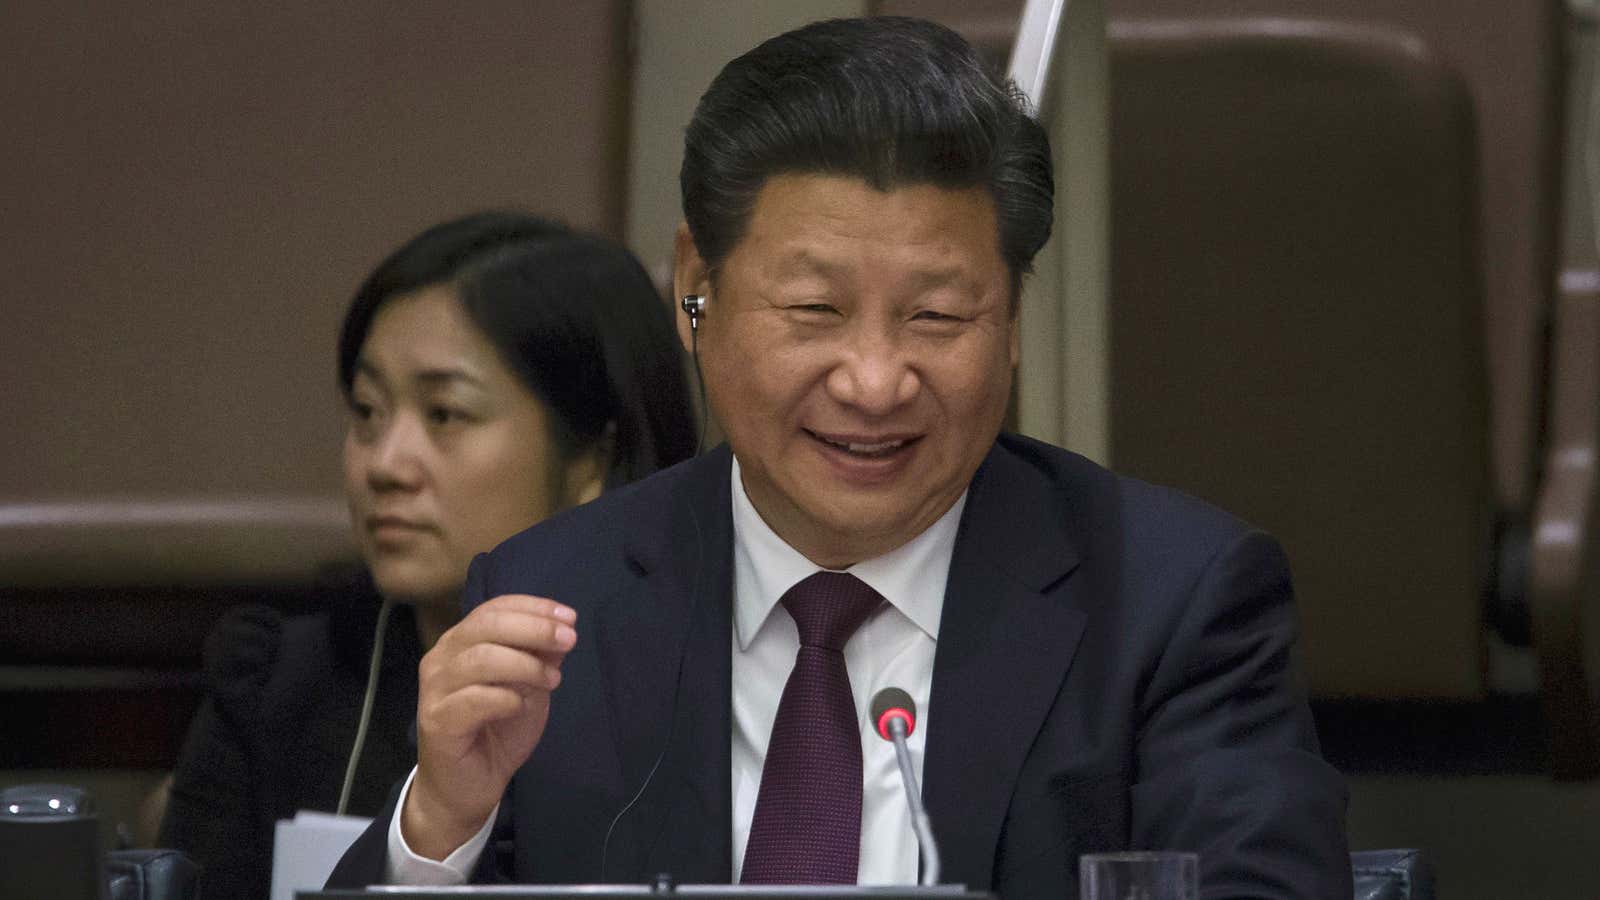 Xi is all smiles at the UN.